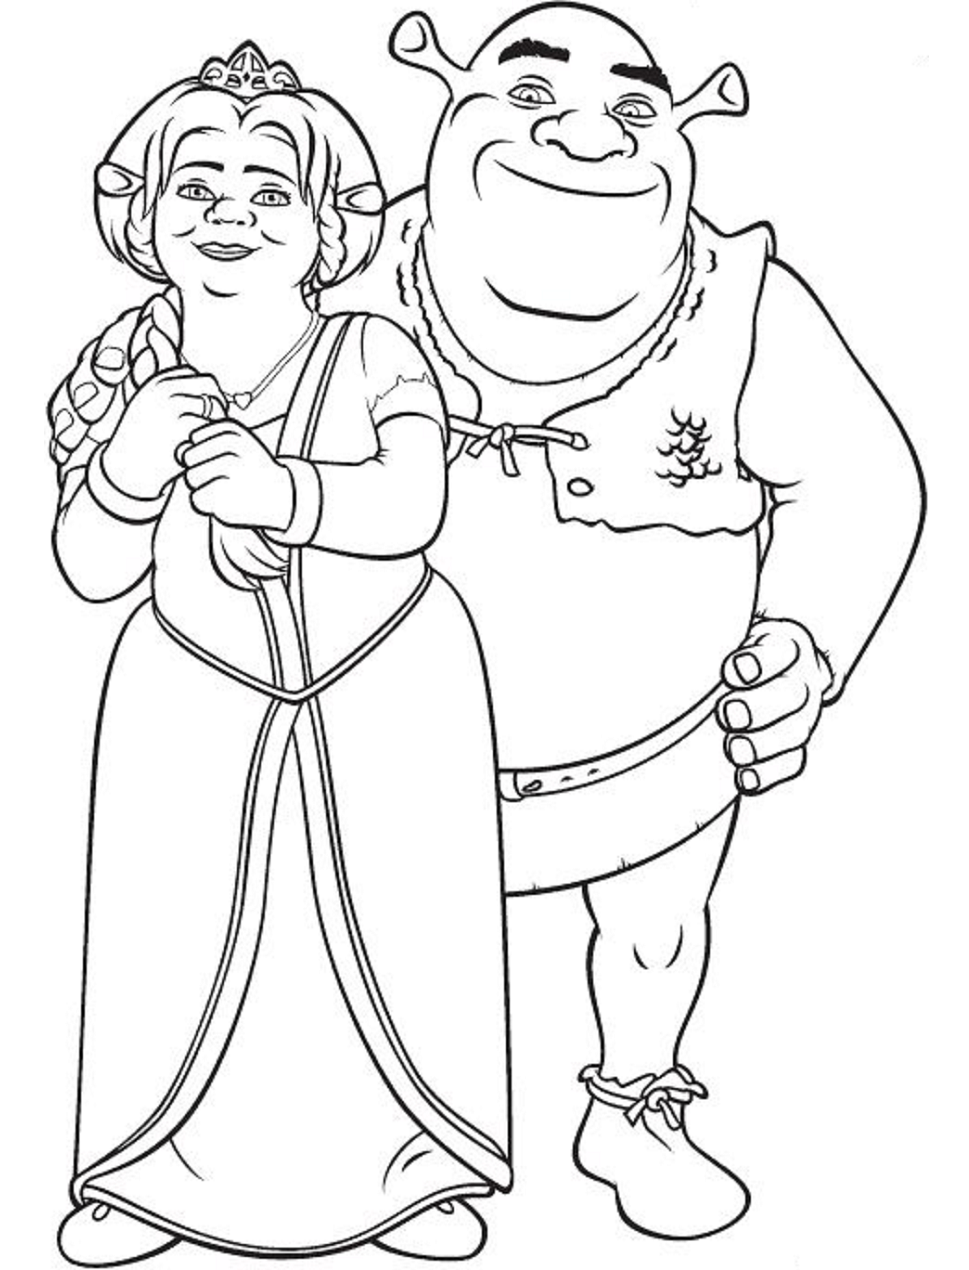 Download Princess Fiona Coloring Pages - Free Printable Coloring Pages for Kids